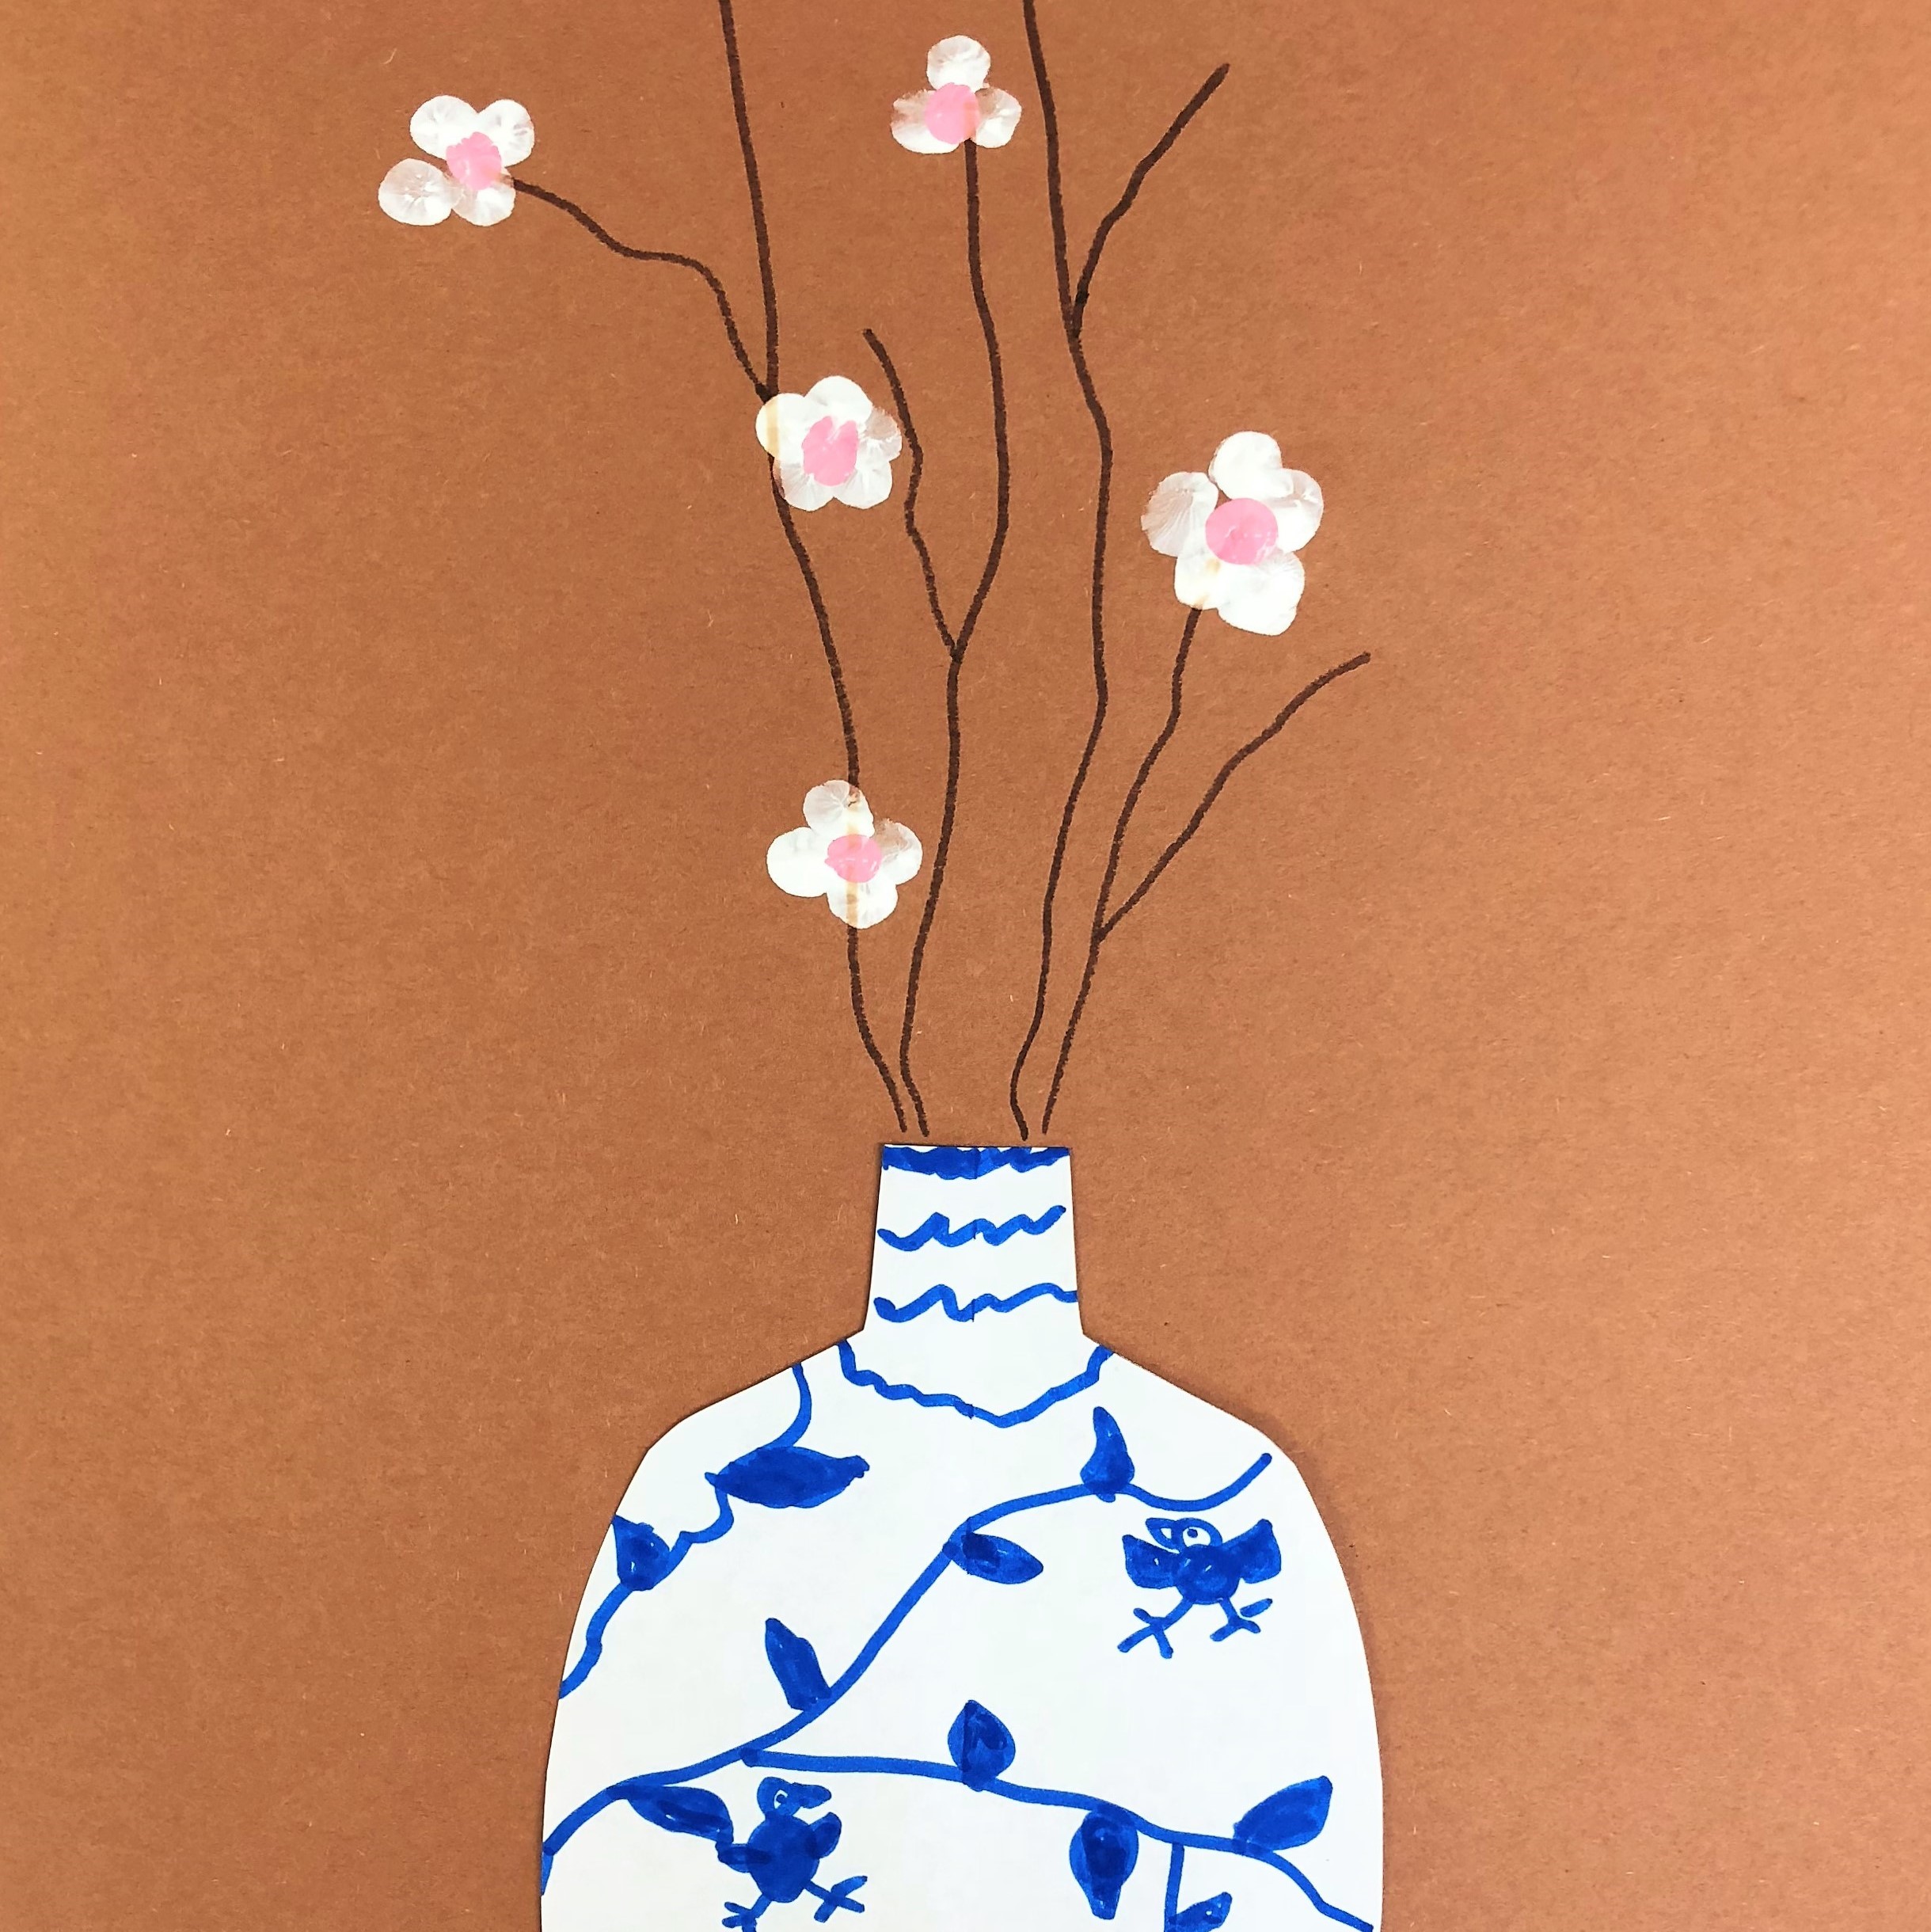 Ming Vase Art And History Lesson For Kids Leah Newton Art